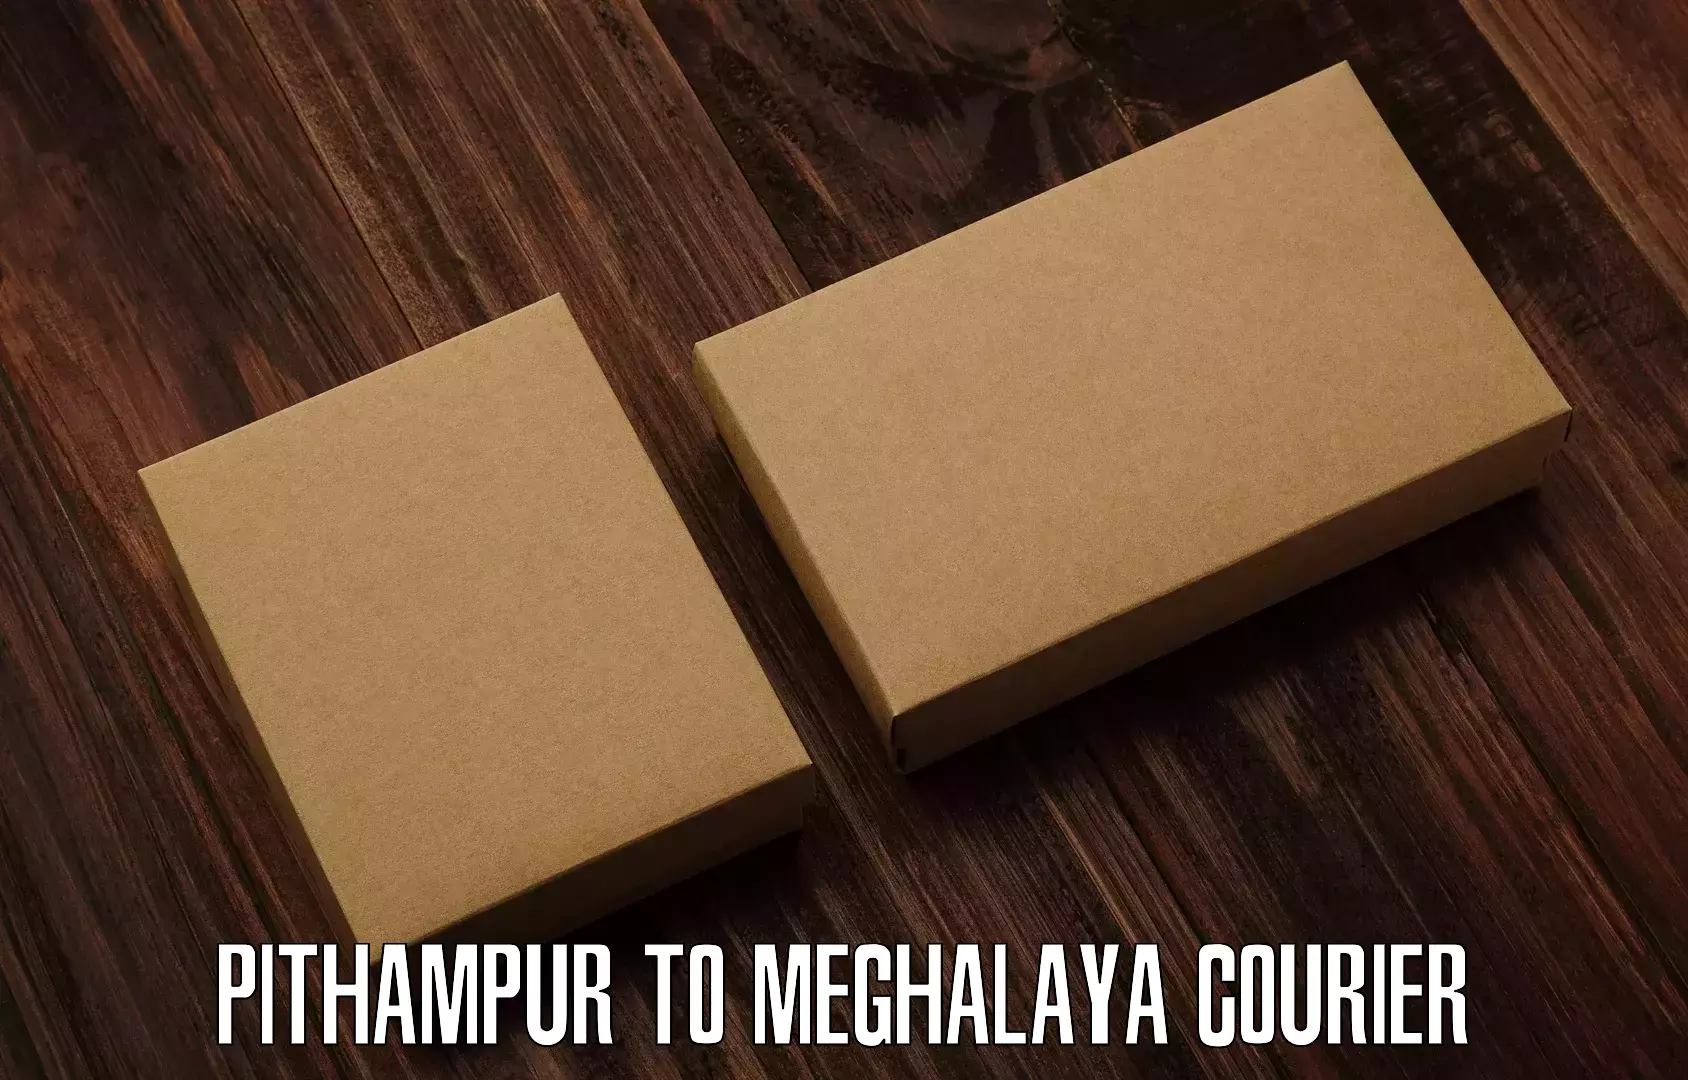 Easy access courier services Pithampur to Meghalaya